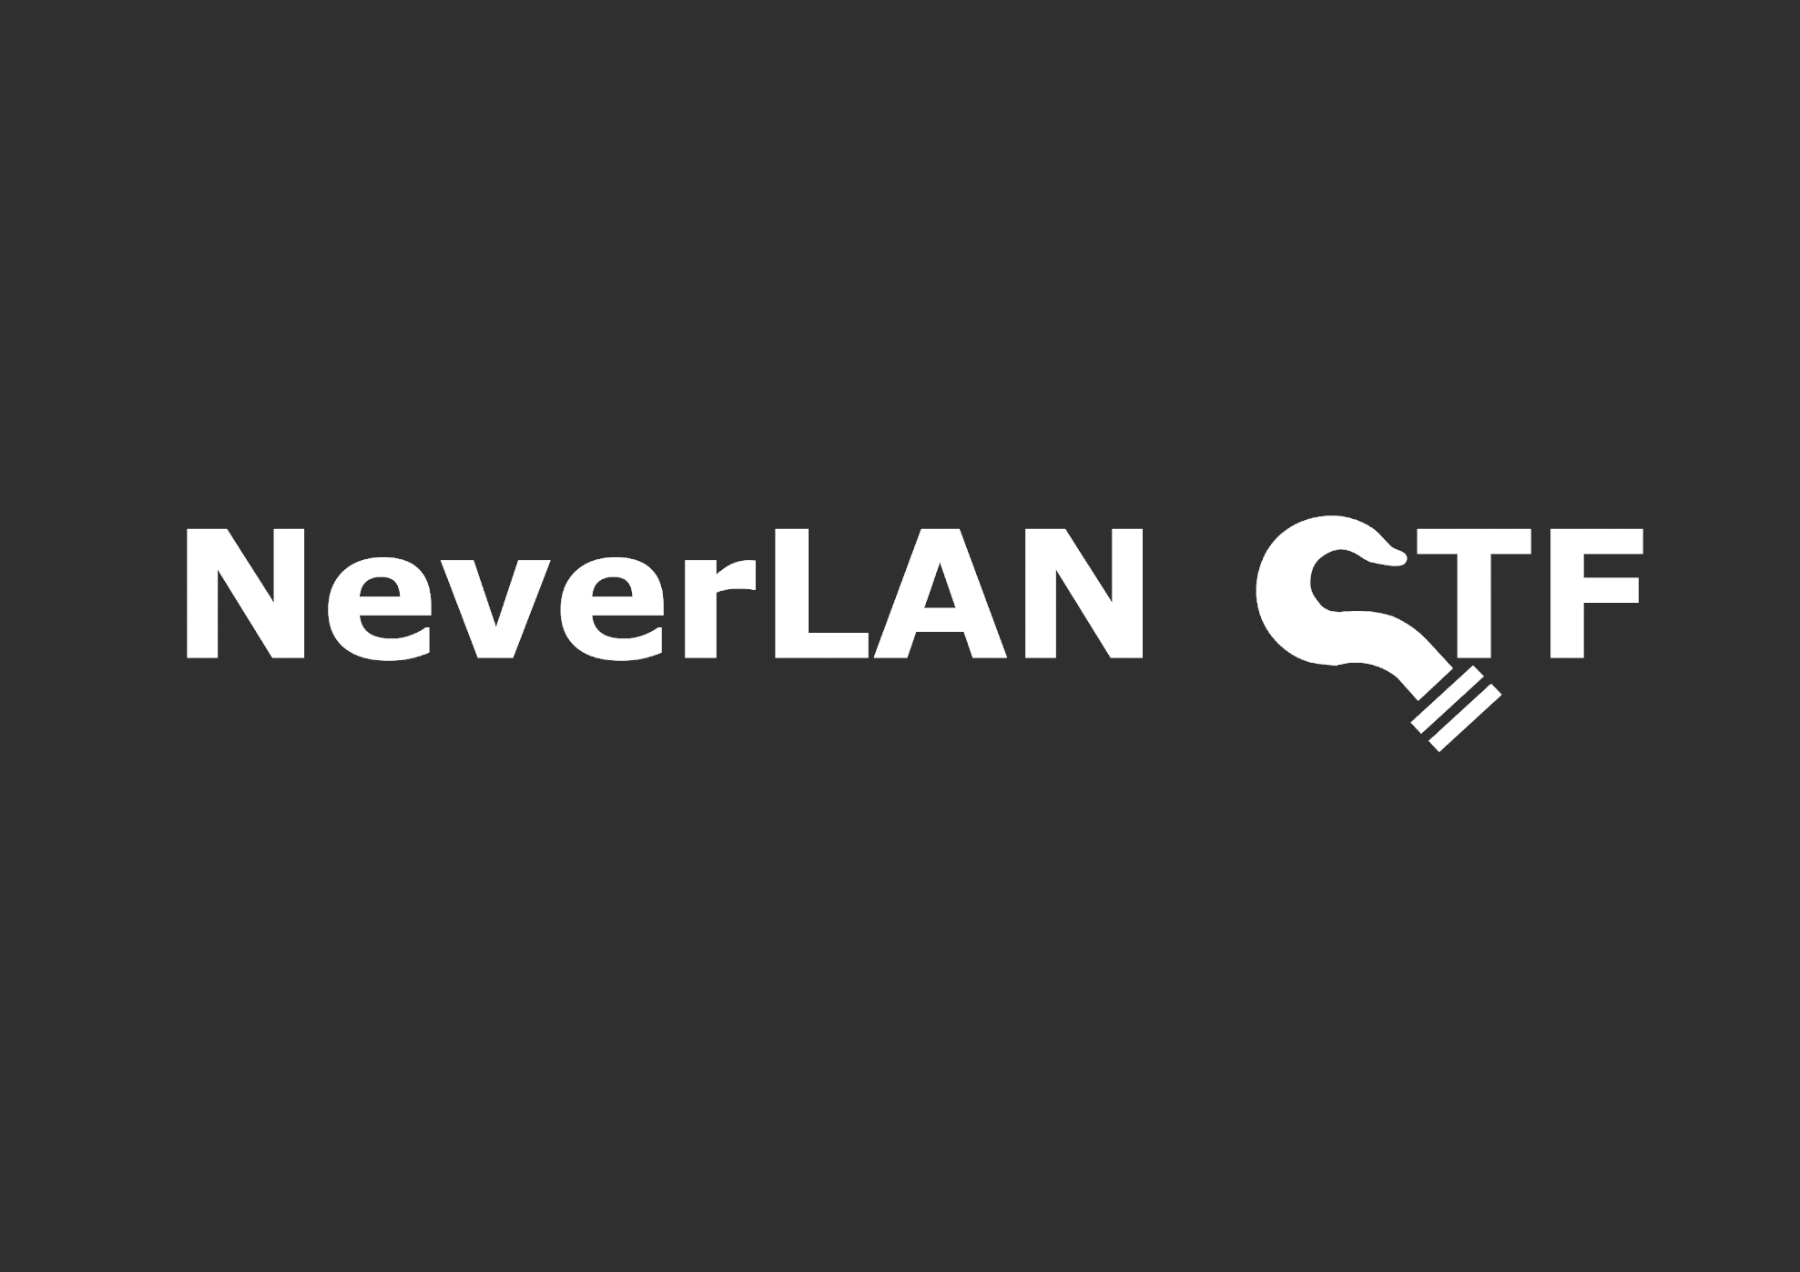 NeverLAN CTF - Look Into the Past